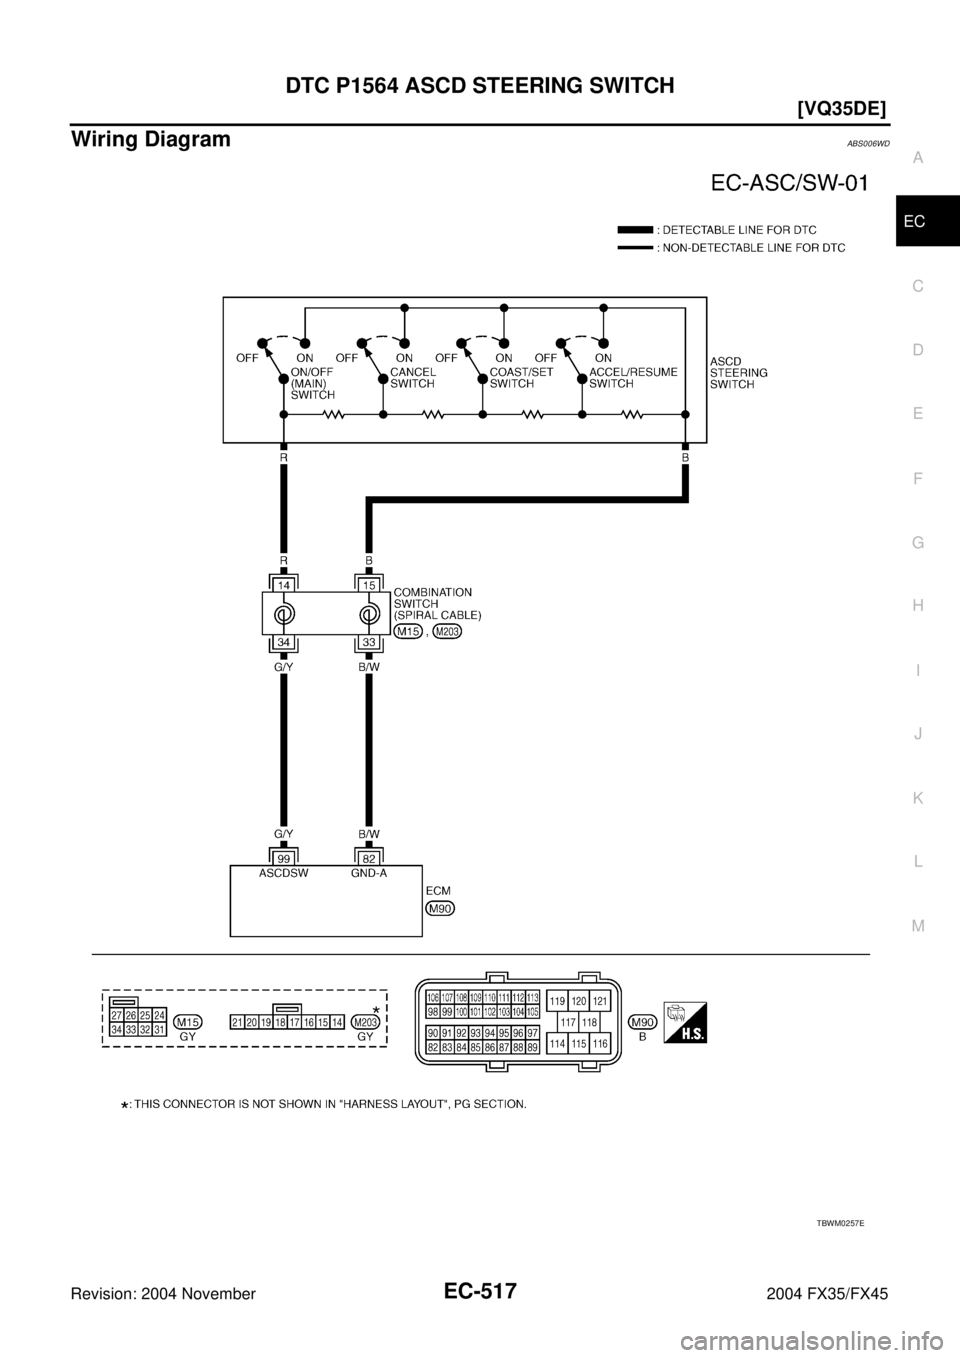 INFINITI FX35 2004  Service Manual DTC P1564 ASCD STEERING SWITCH
EC-517
[VQ35DE]
C
D
E
F
G
H
I
J
K
L
MA
EC
Revision: 2004 November 2004 FX35/FX45
Wiring DiagramABS006WD
TBWM0257E 